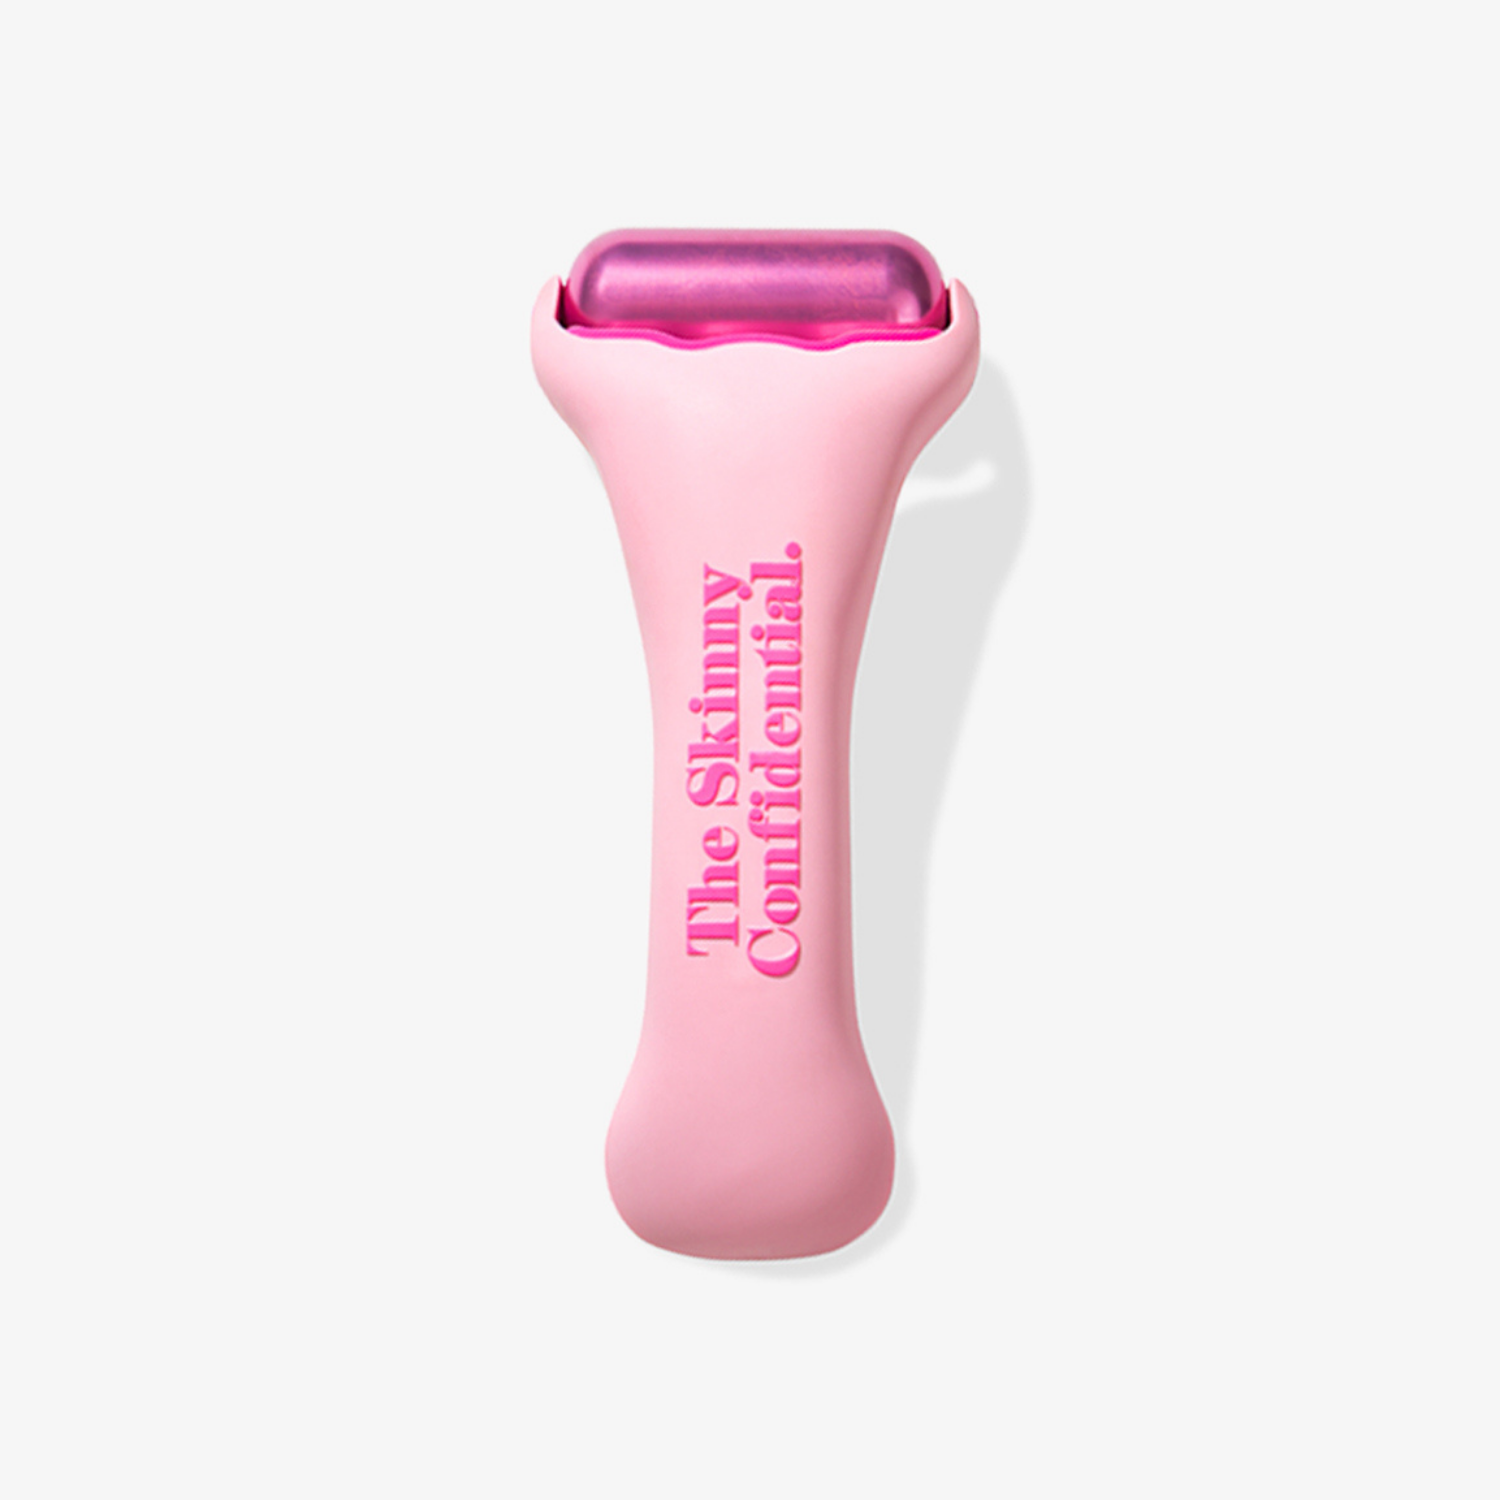 The Skinny Confidential Hot Mess Ice Roller Shop at Exclusive Beauty